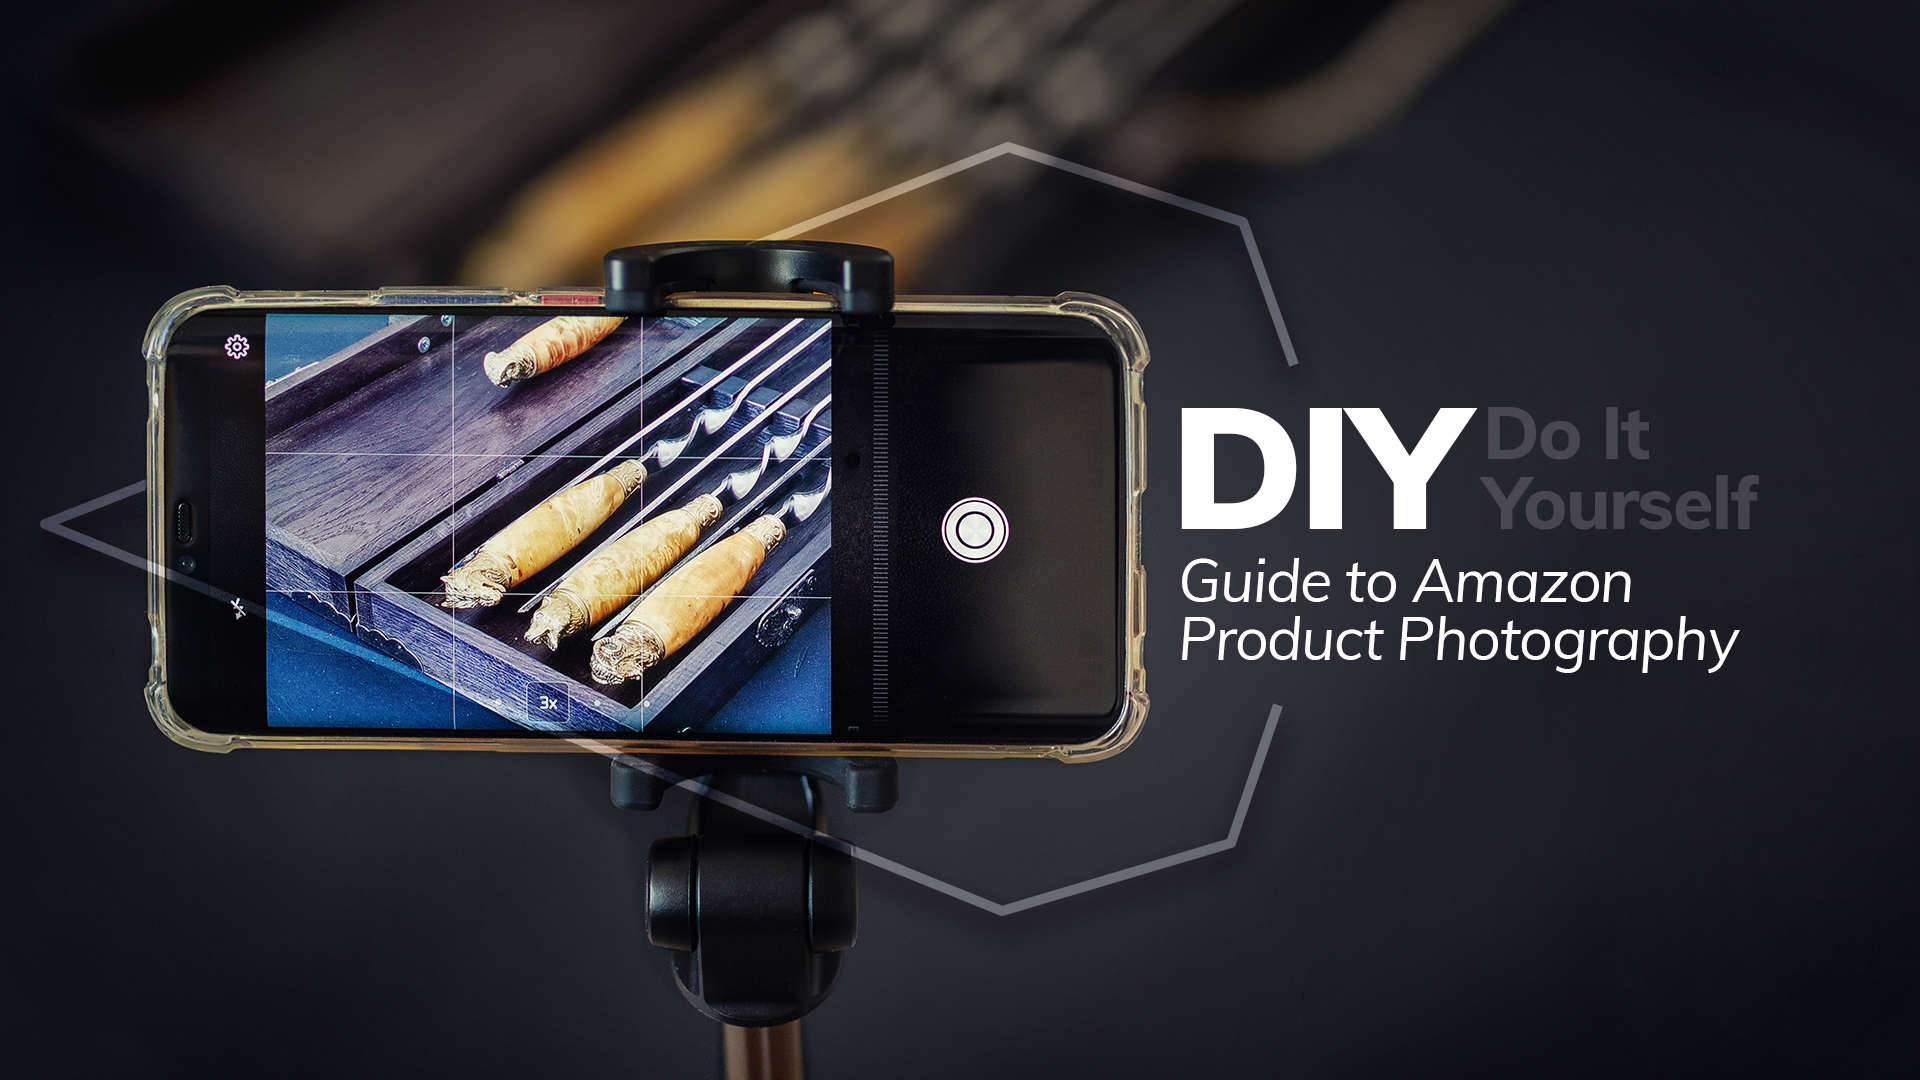 DIY Guide to Amazon Product Photography: 7 Need-to-Know Tips